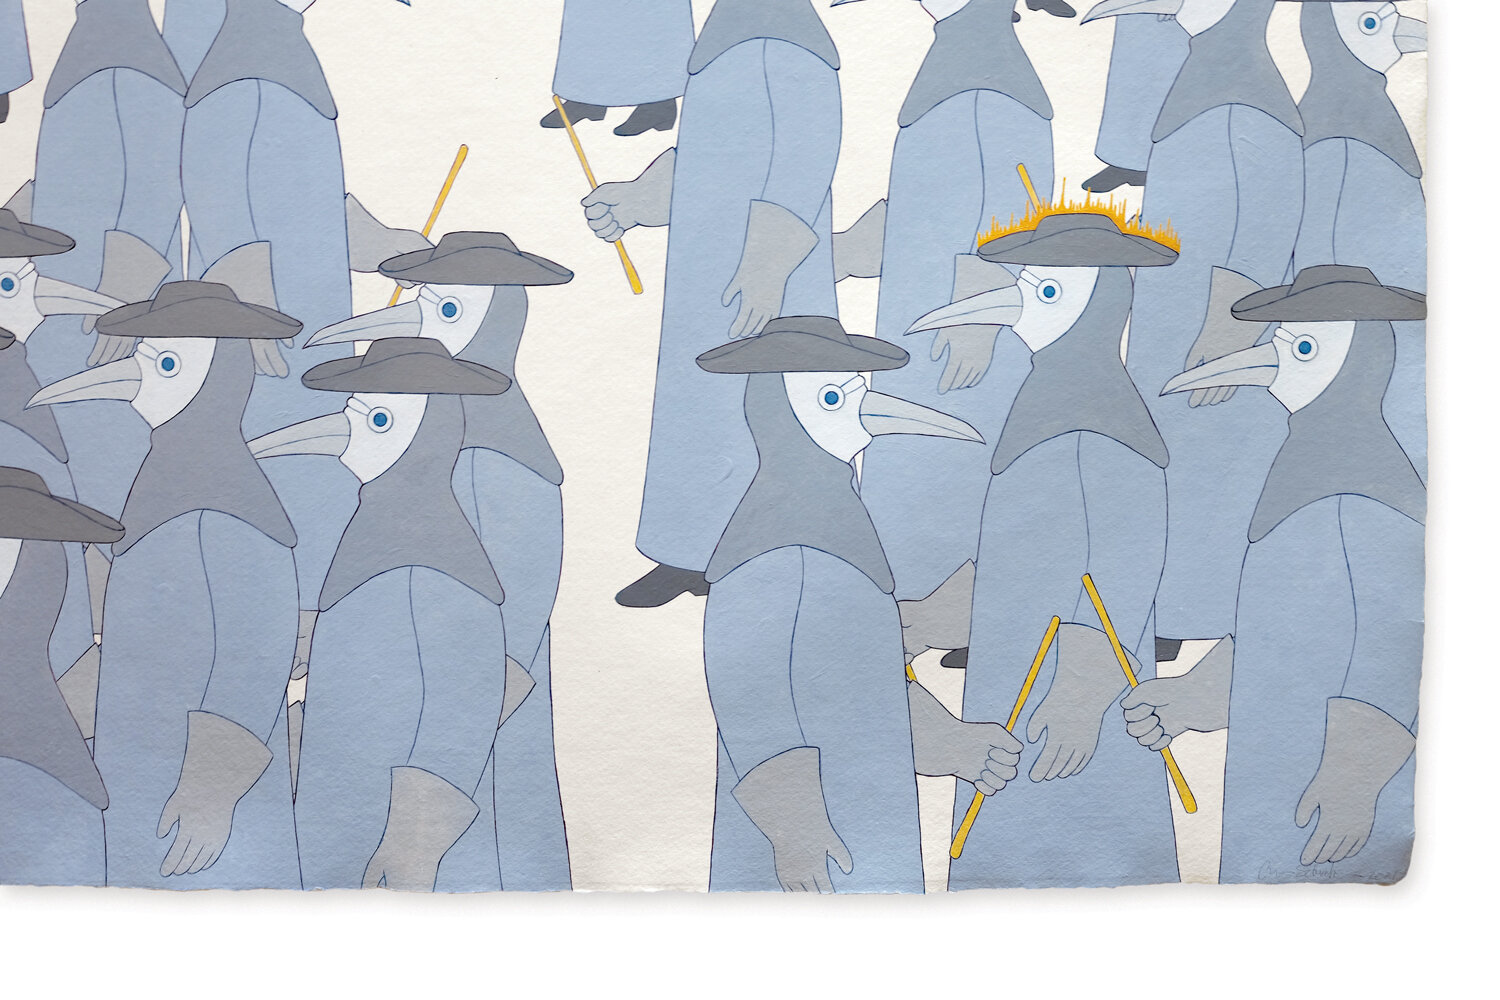   Plague Doctors (Inattention),  2021 Acrylic on paper, 22” x 30”    View Next Set →   